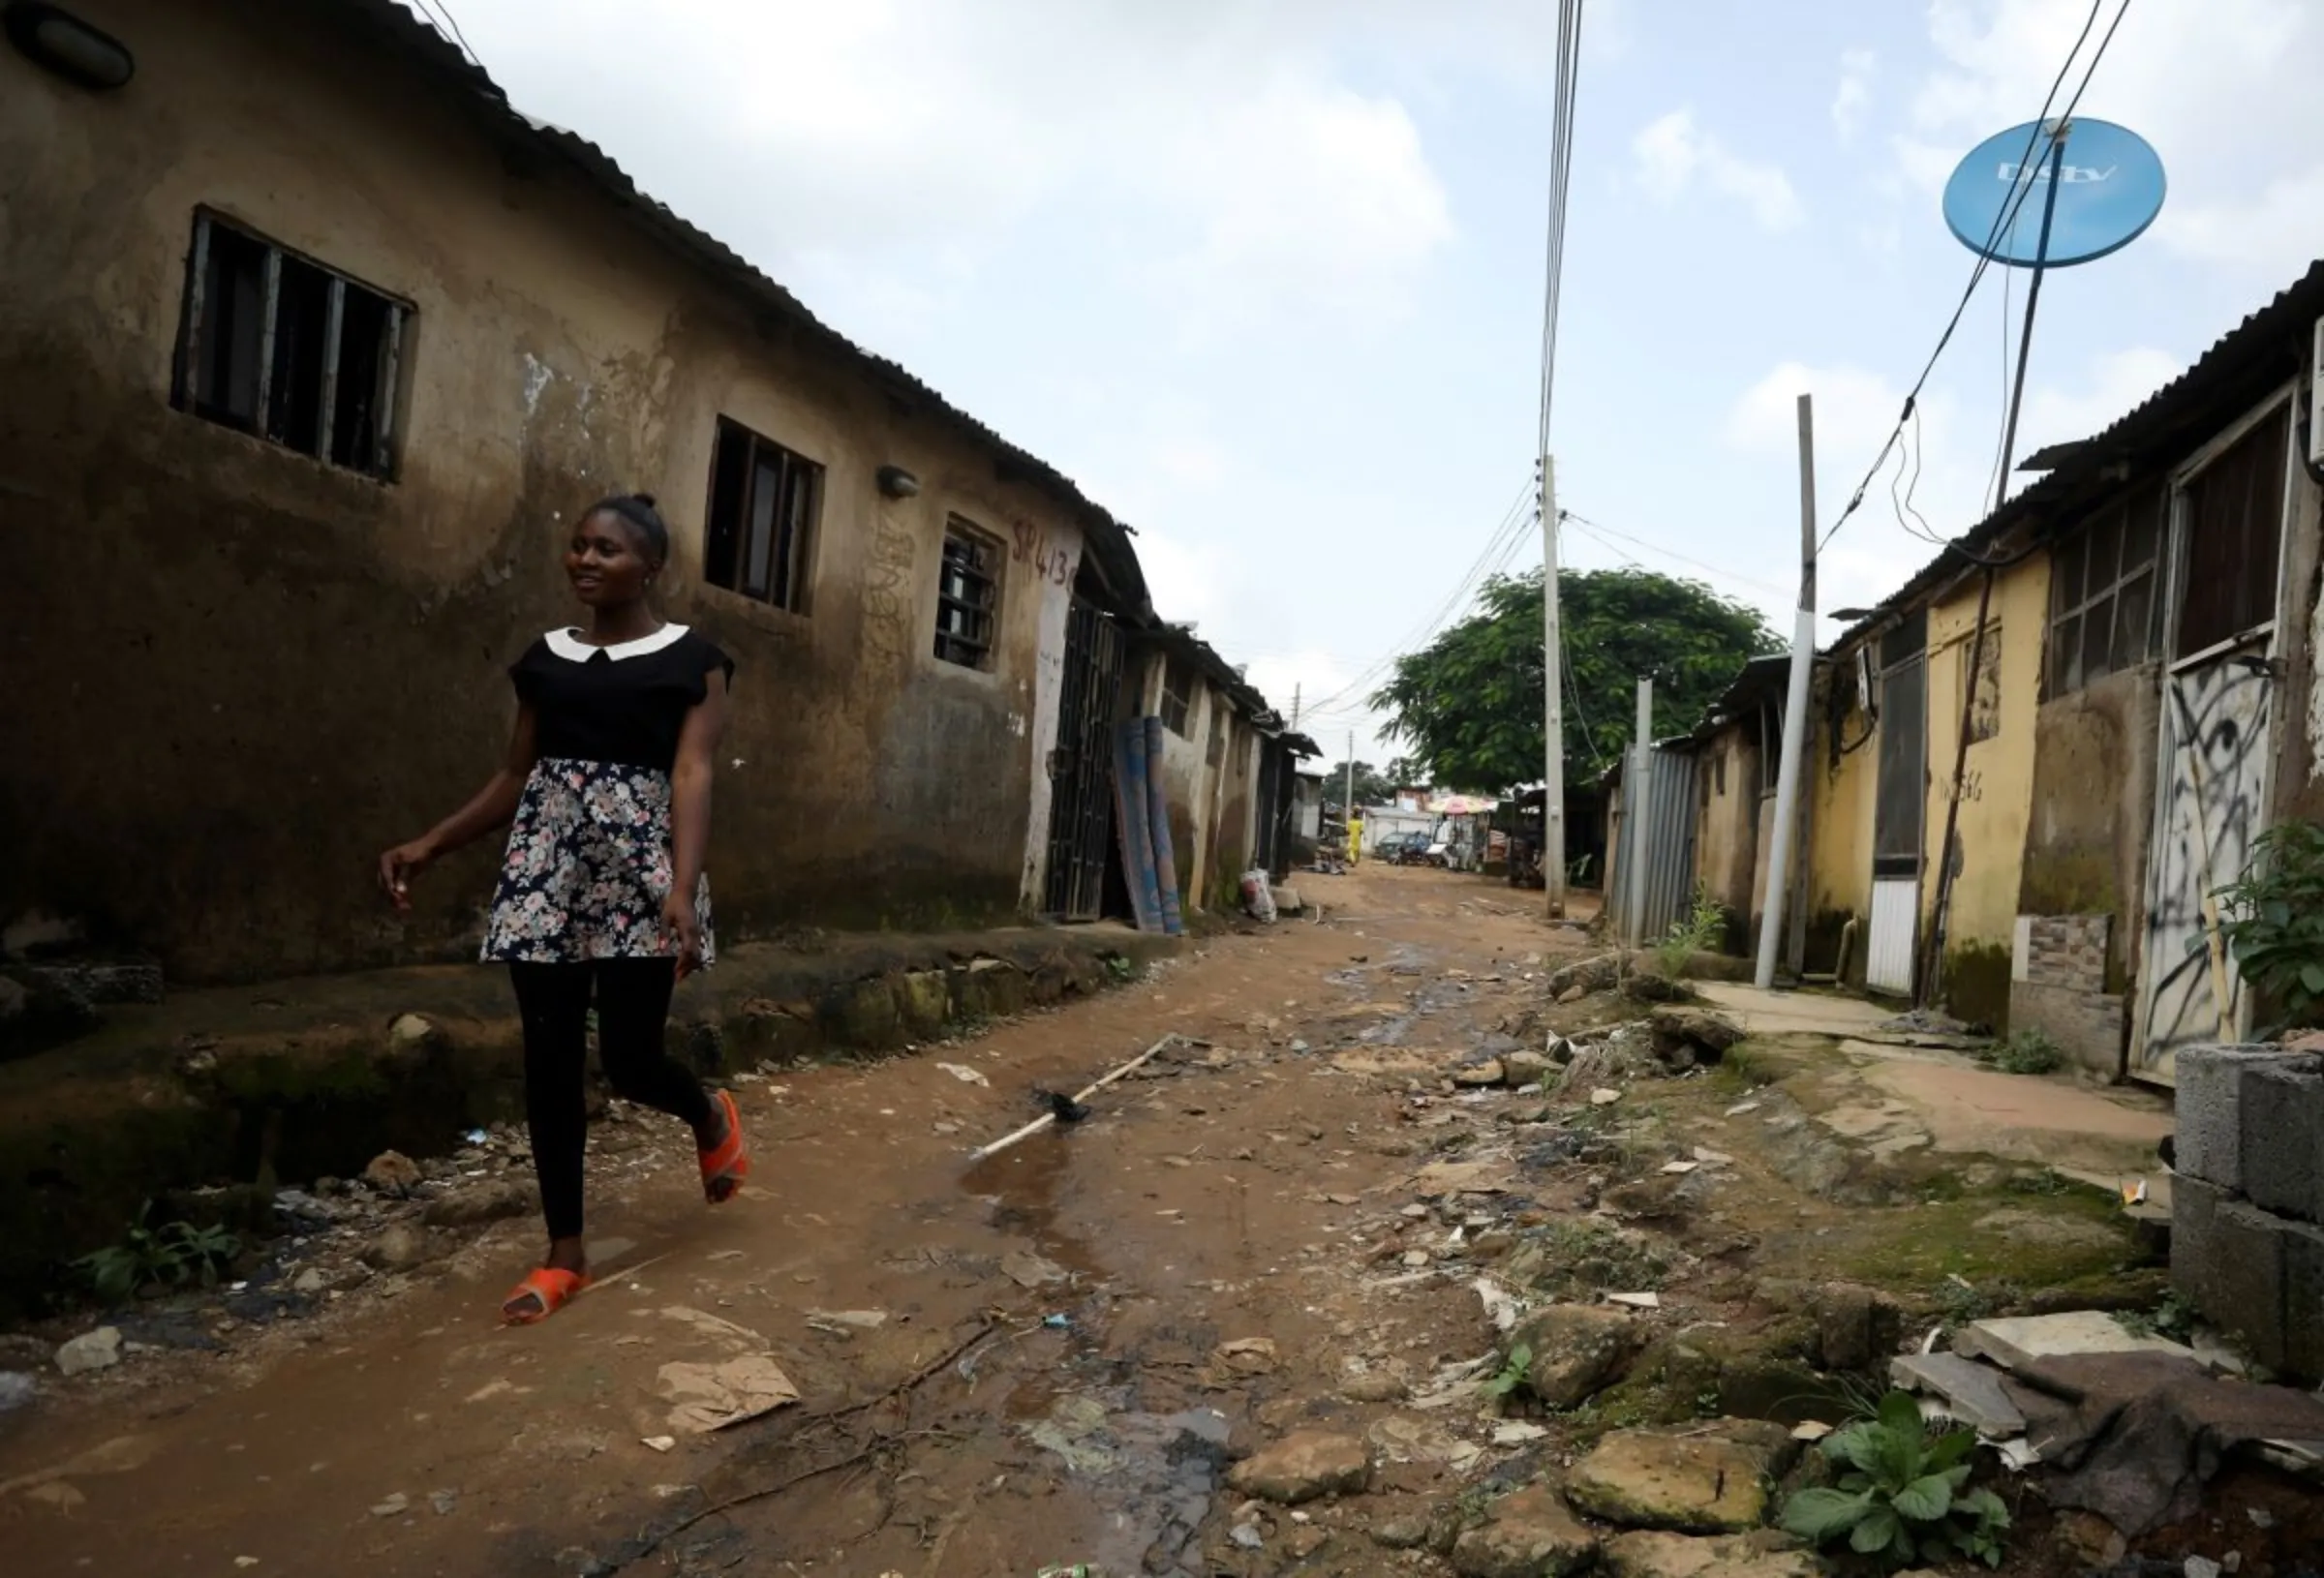 A woman walks down a street in one of the overpopulated settlements of Abuja,
Nigeria, September 23, 2019. REUTERS/Afolabi Sotunde